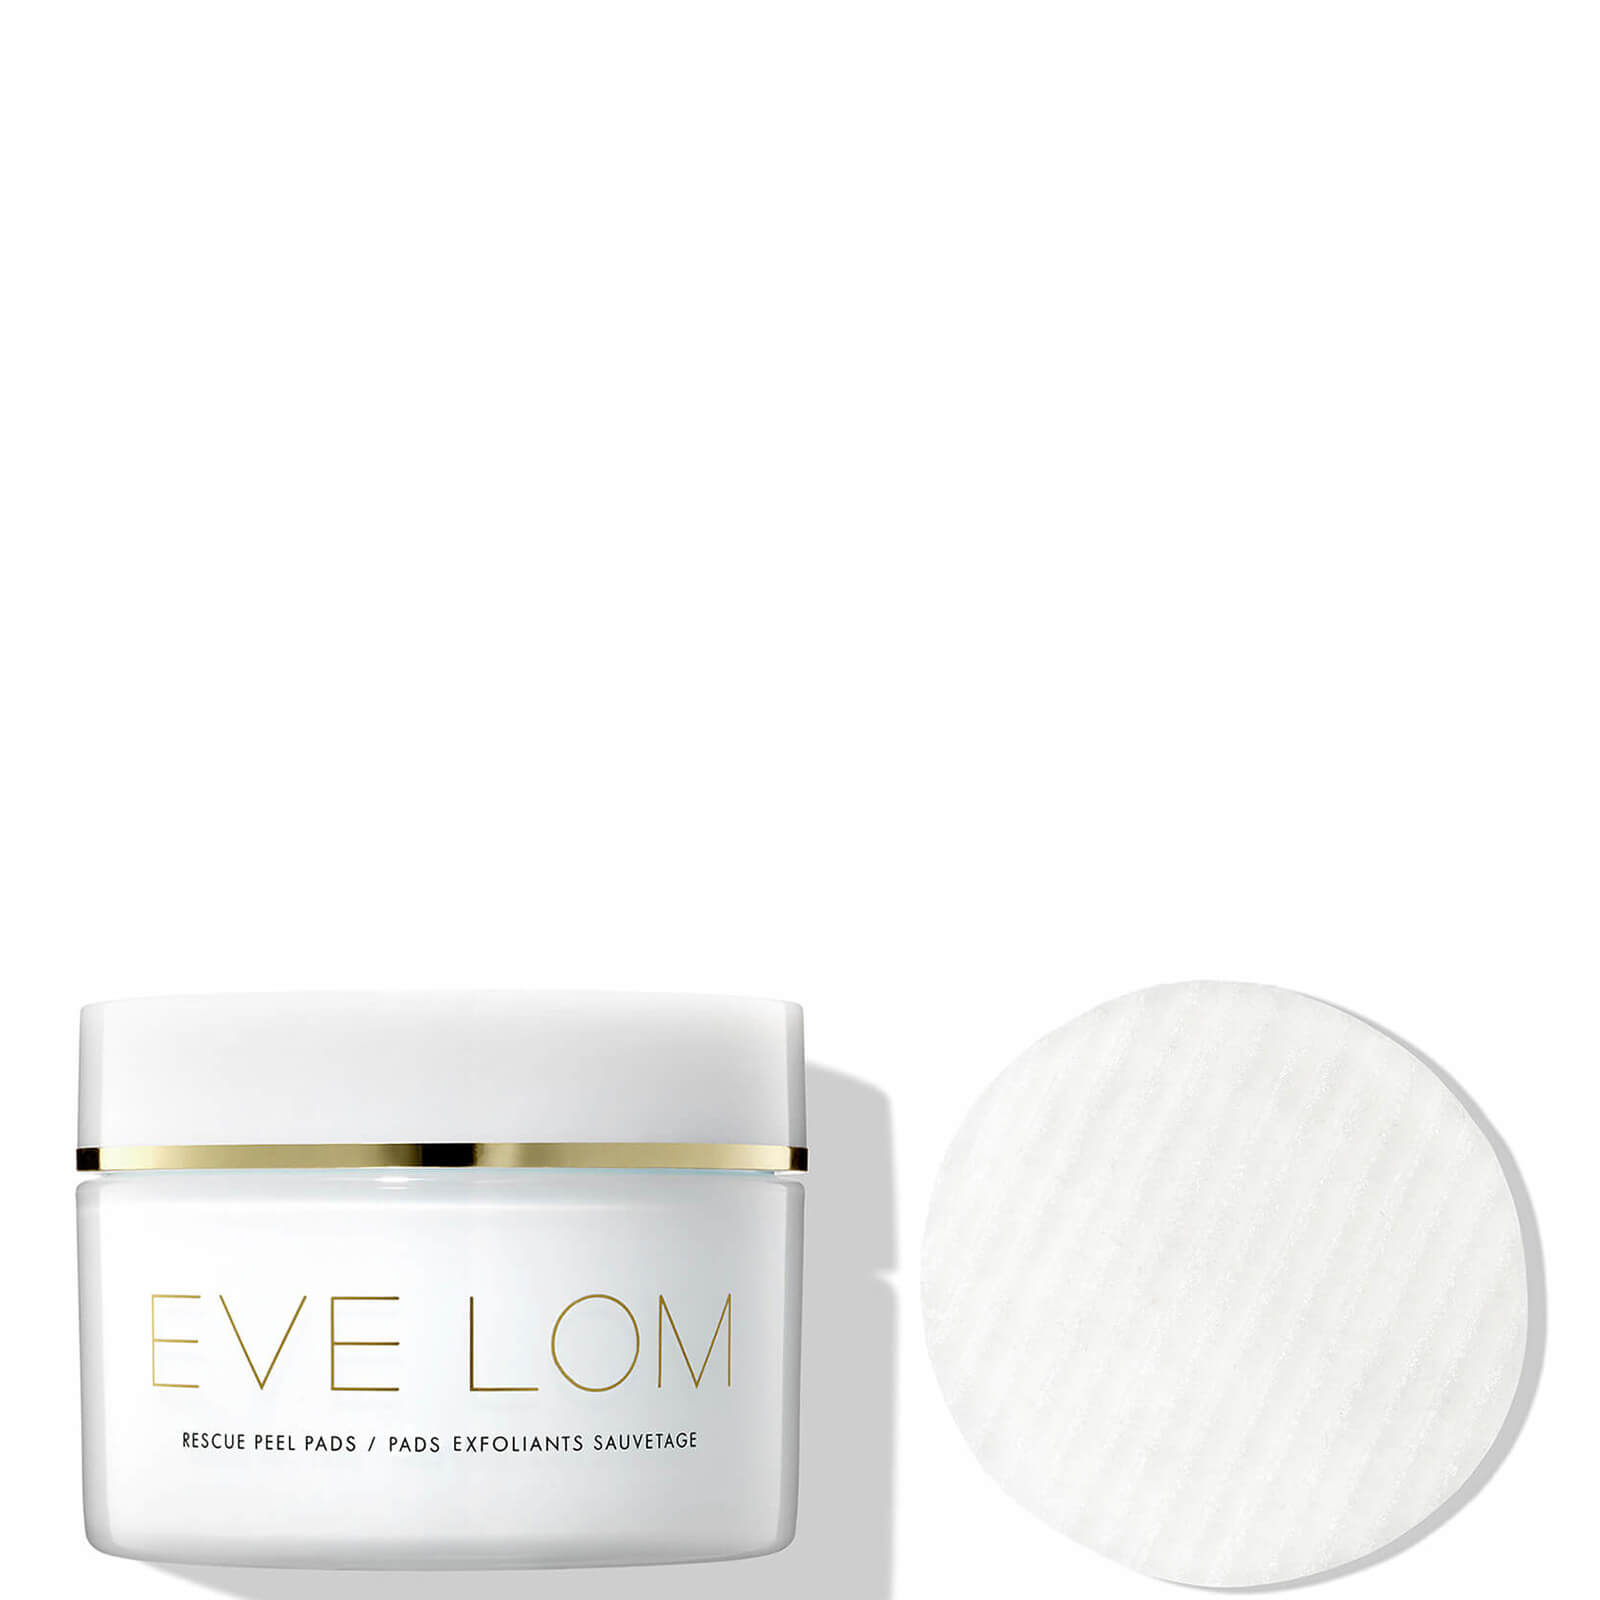 Image of Eve Lom Rescue Peel Pads